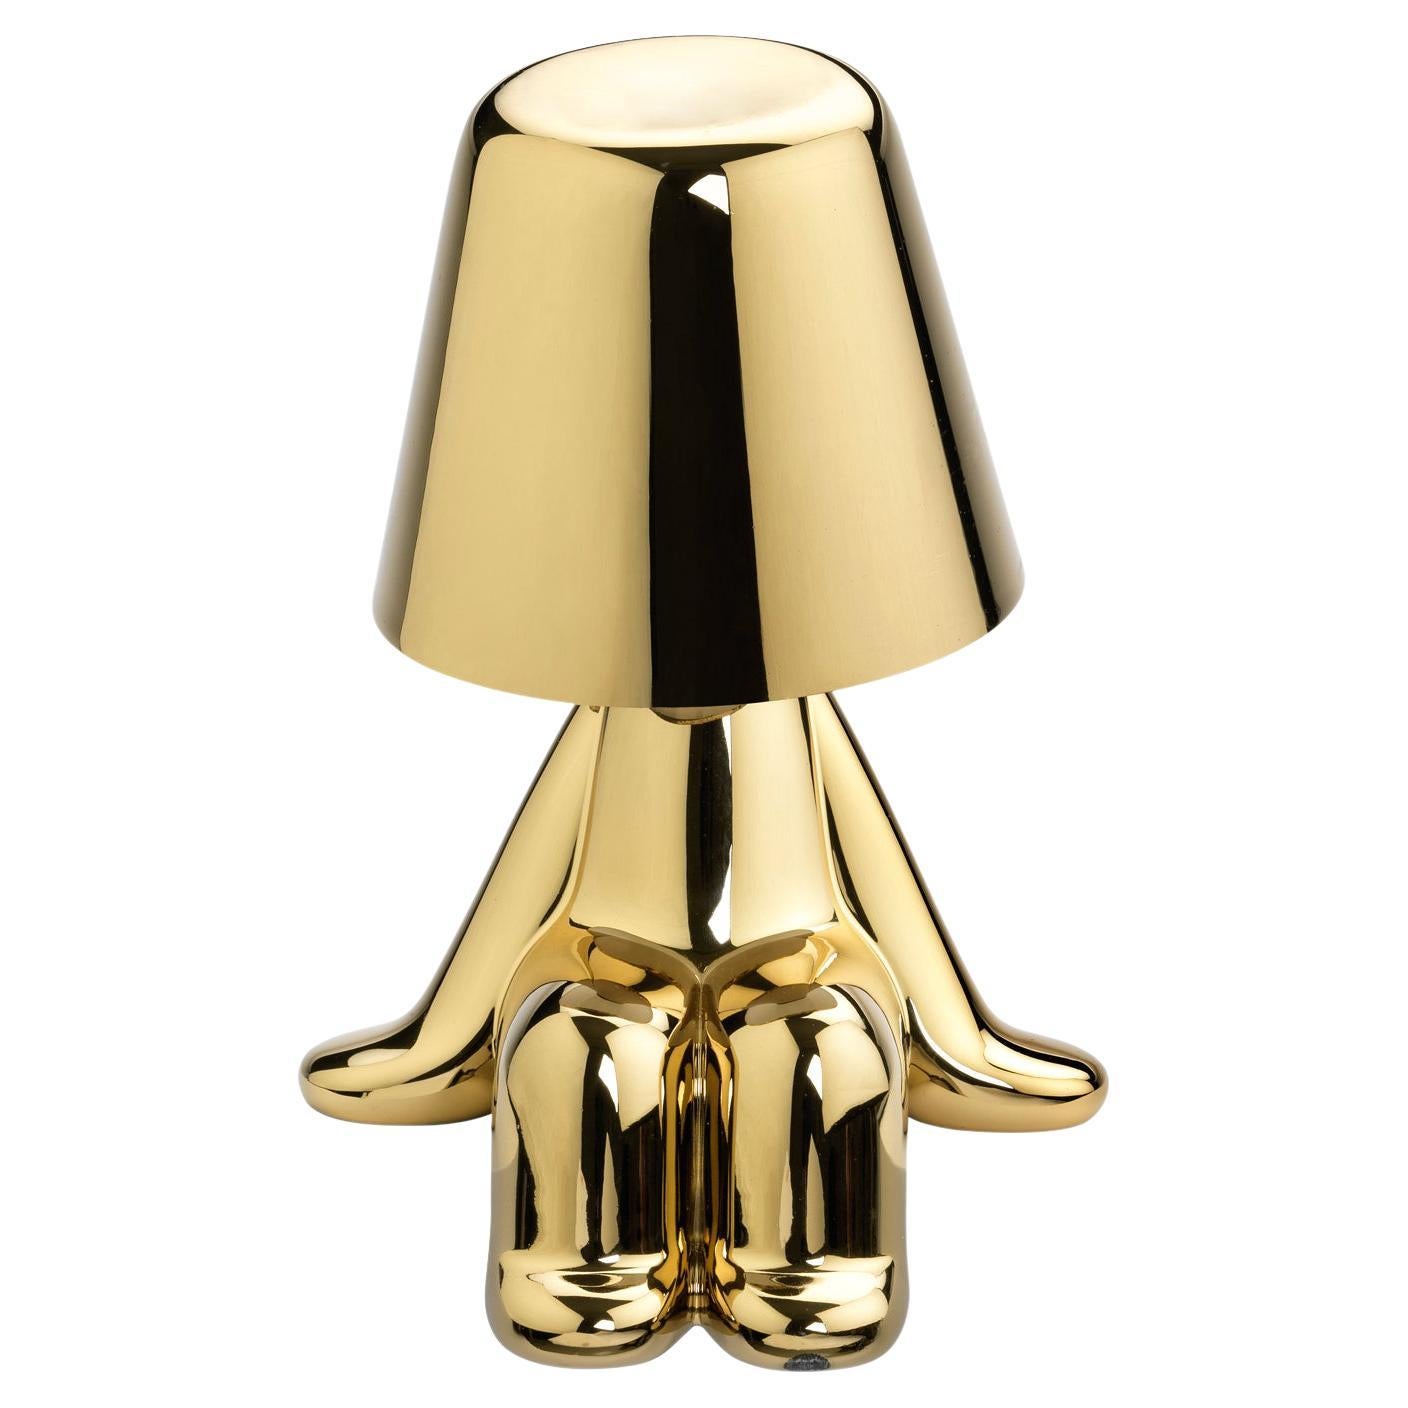 Golden Brothers Sam LED Lamp, Designed by Stefano Giovannoni, Made in Italy